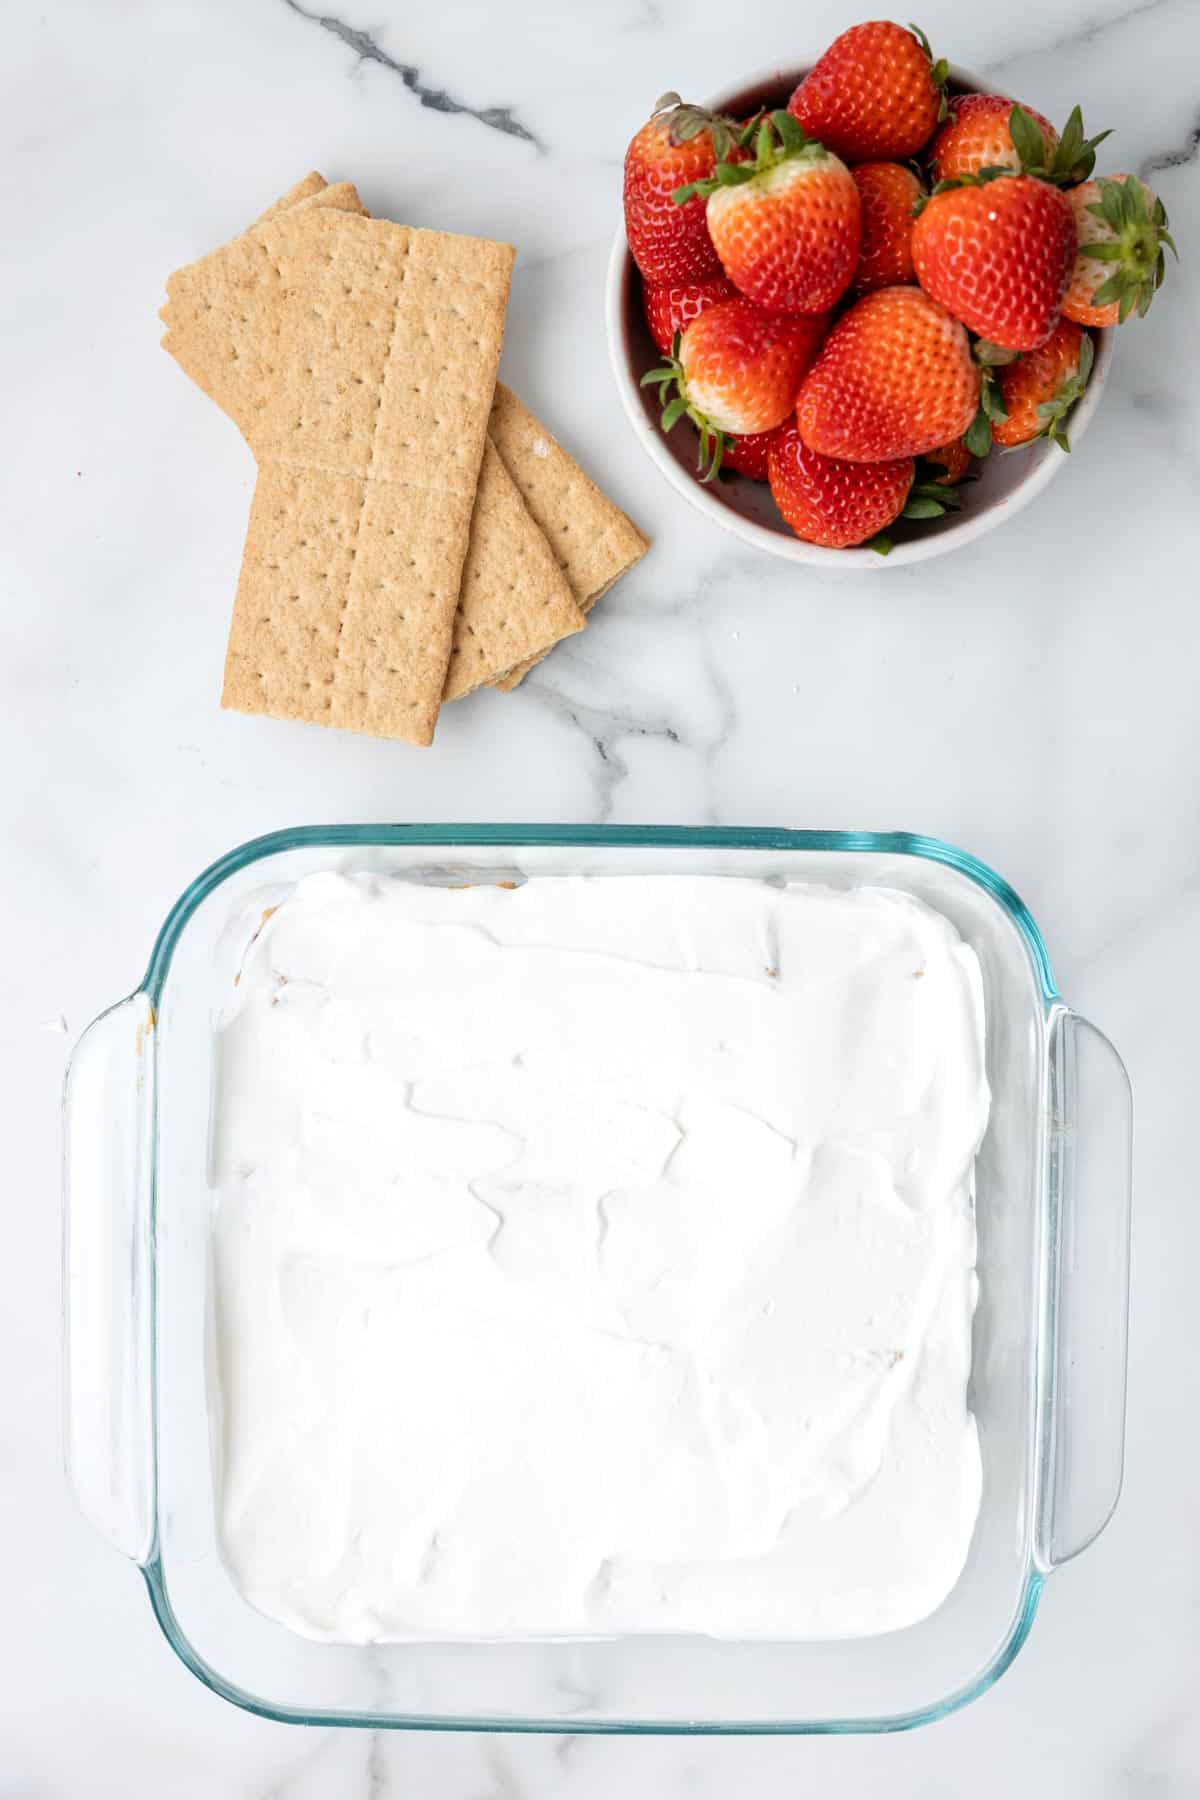 Cool whip layer in a baking dish